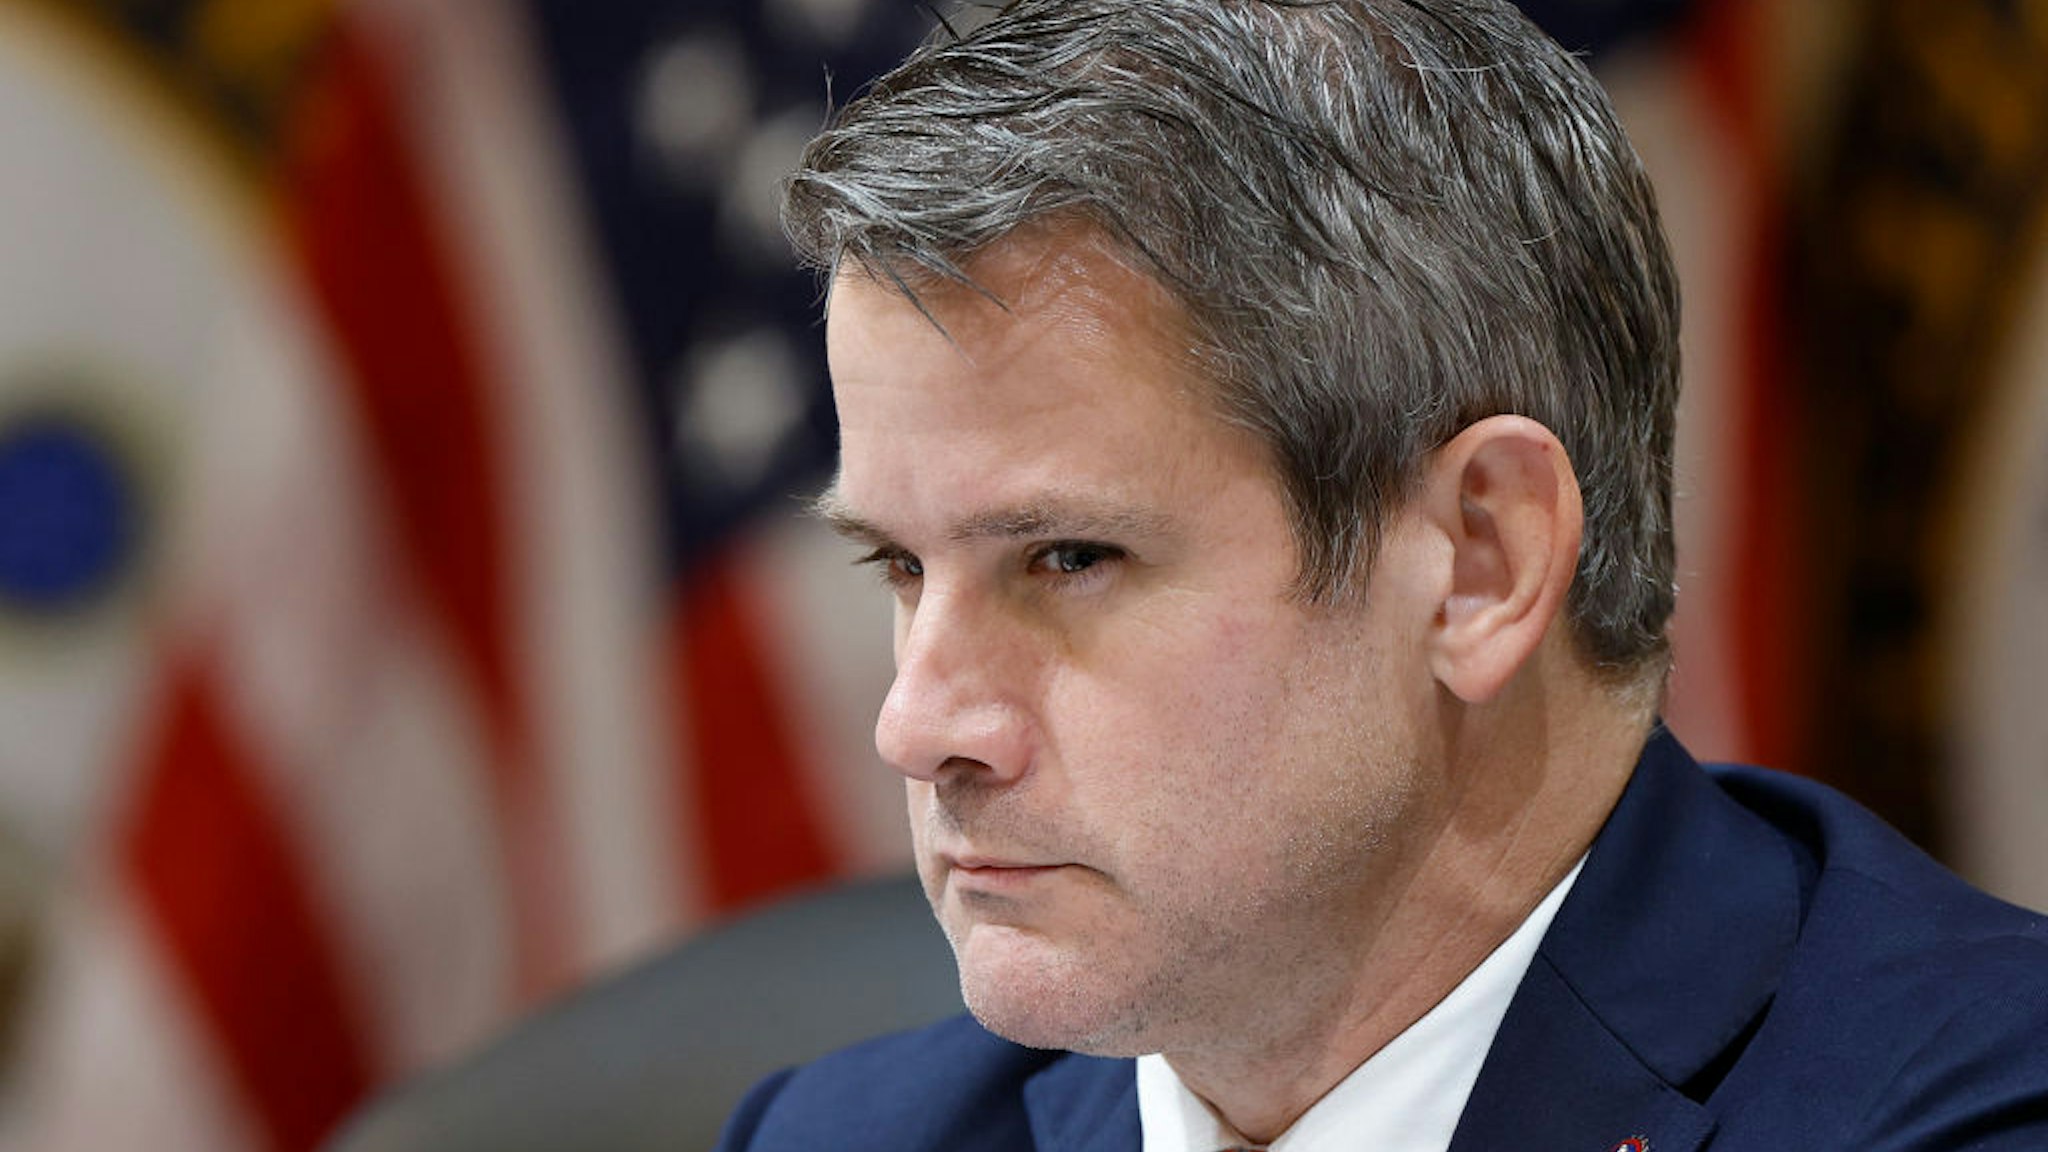 WASHINGTON, DC - DECEMBER 19: U.S. Rep Adam Kinzinger (R-IL) participates in the last meeting of the House Select Committee to Investigate the January 6 Attack on the U.S. Capitol in the Canon House Office Building on Capitol Hill on December 19, 2022 in Washington, DC. The committee is expected to approve its final report and vote on referring charges to the Justice Department. (Photo by Anna Moneymaker/Getty Images)